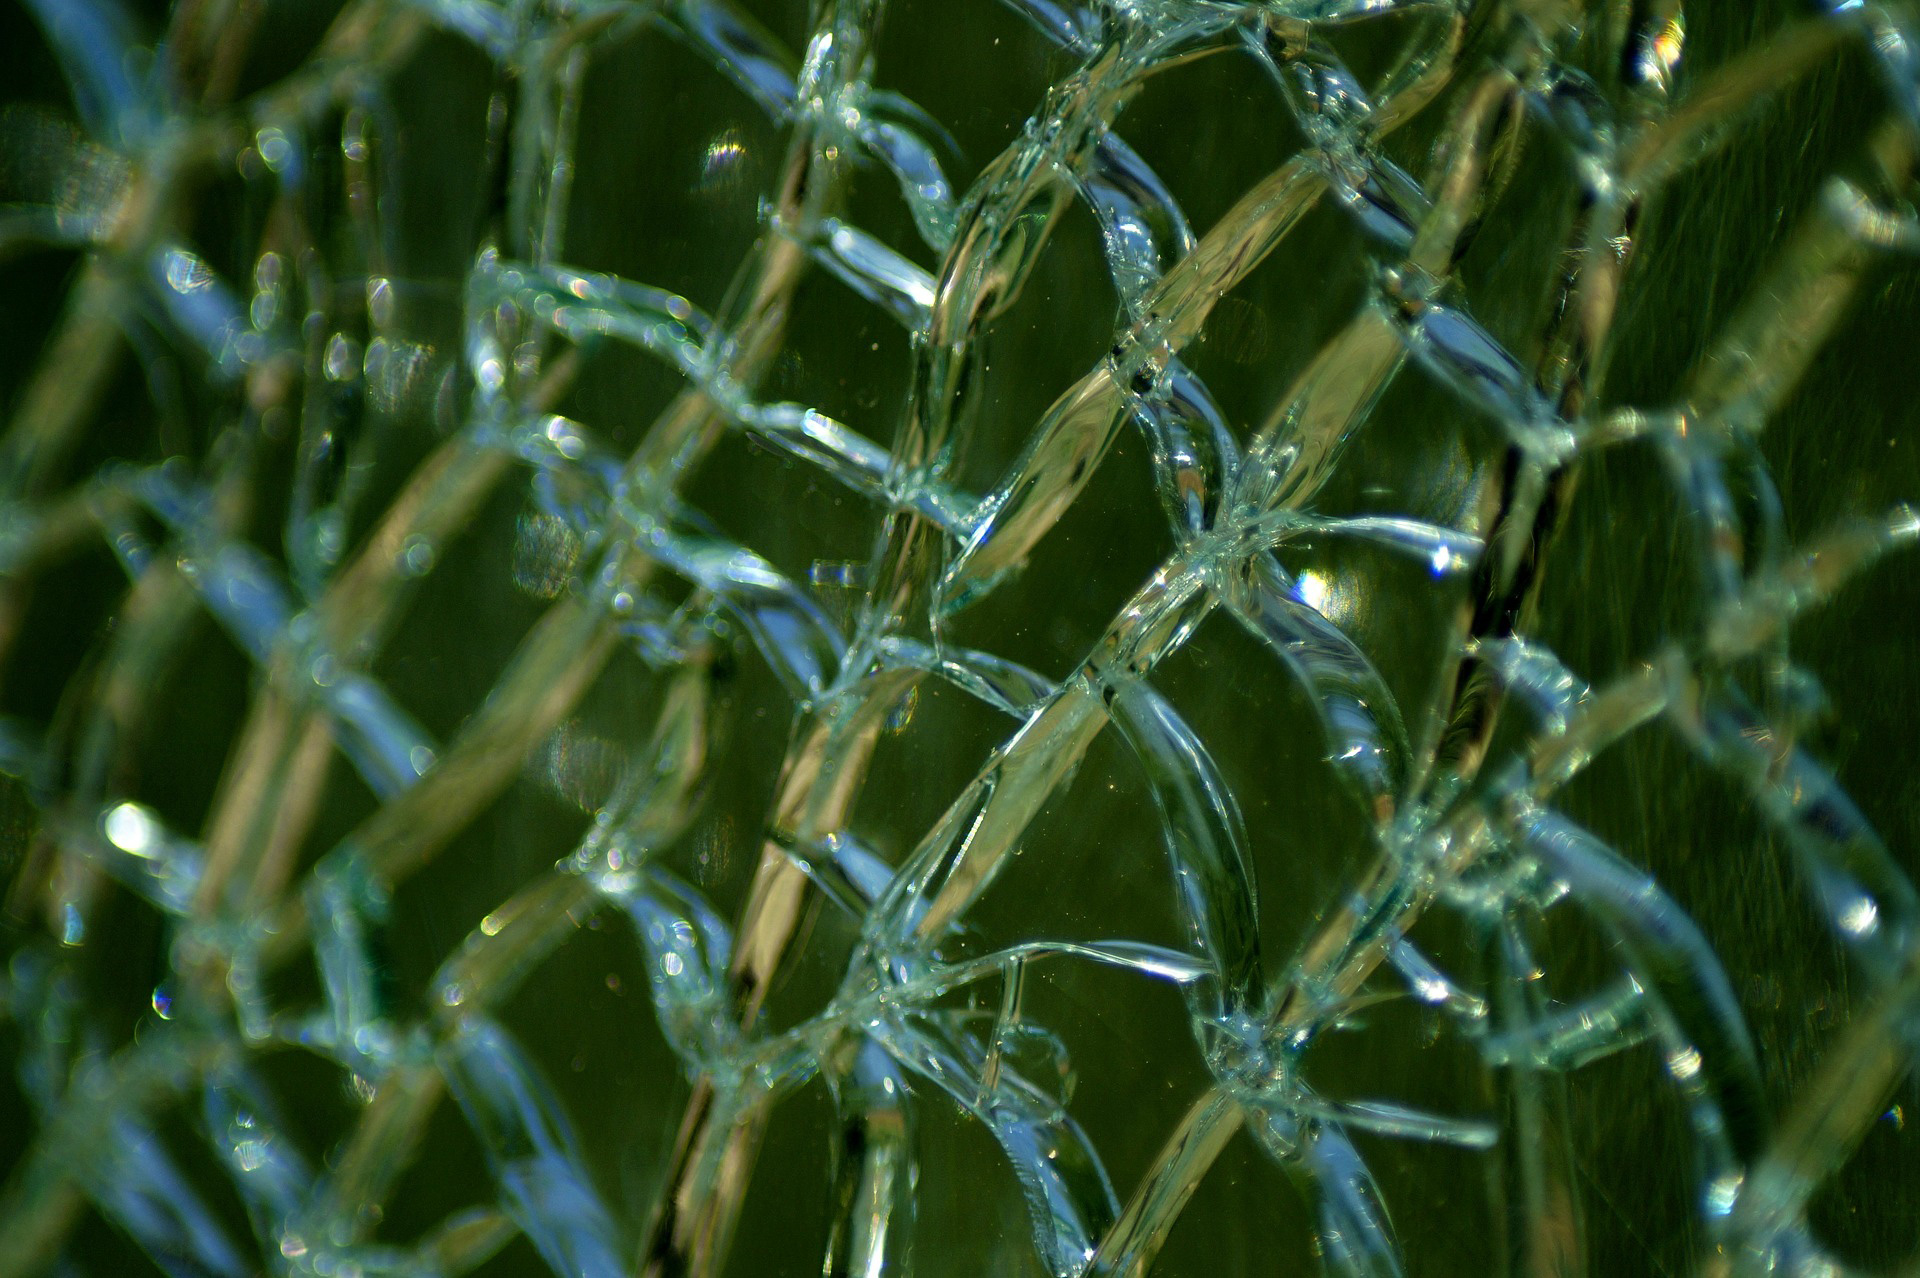 Close-up of cracked tempered glass showing blunt granules.